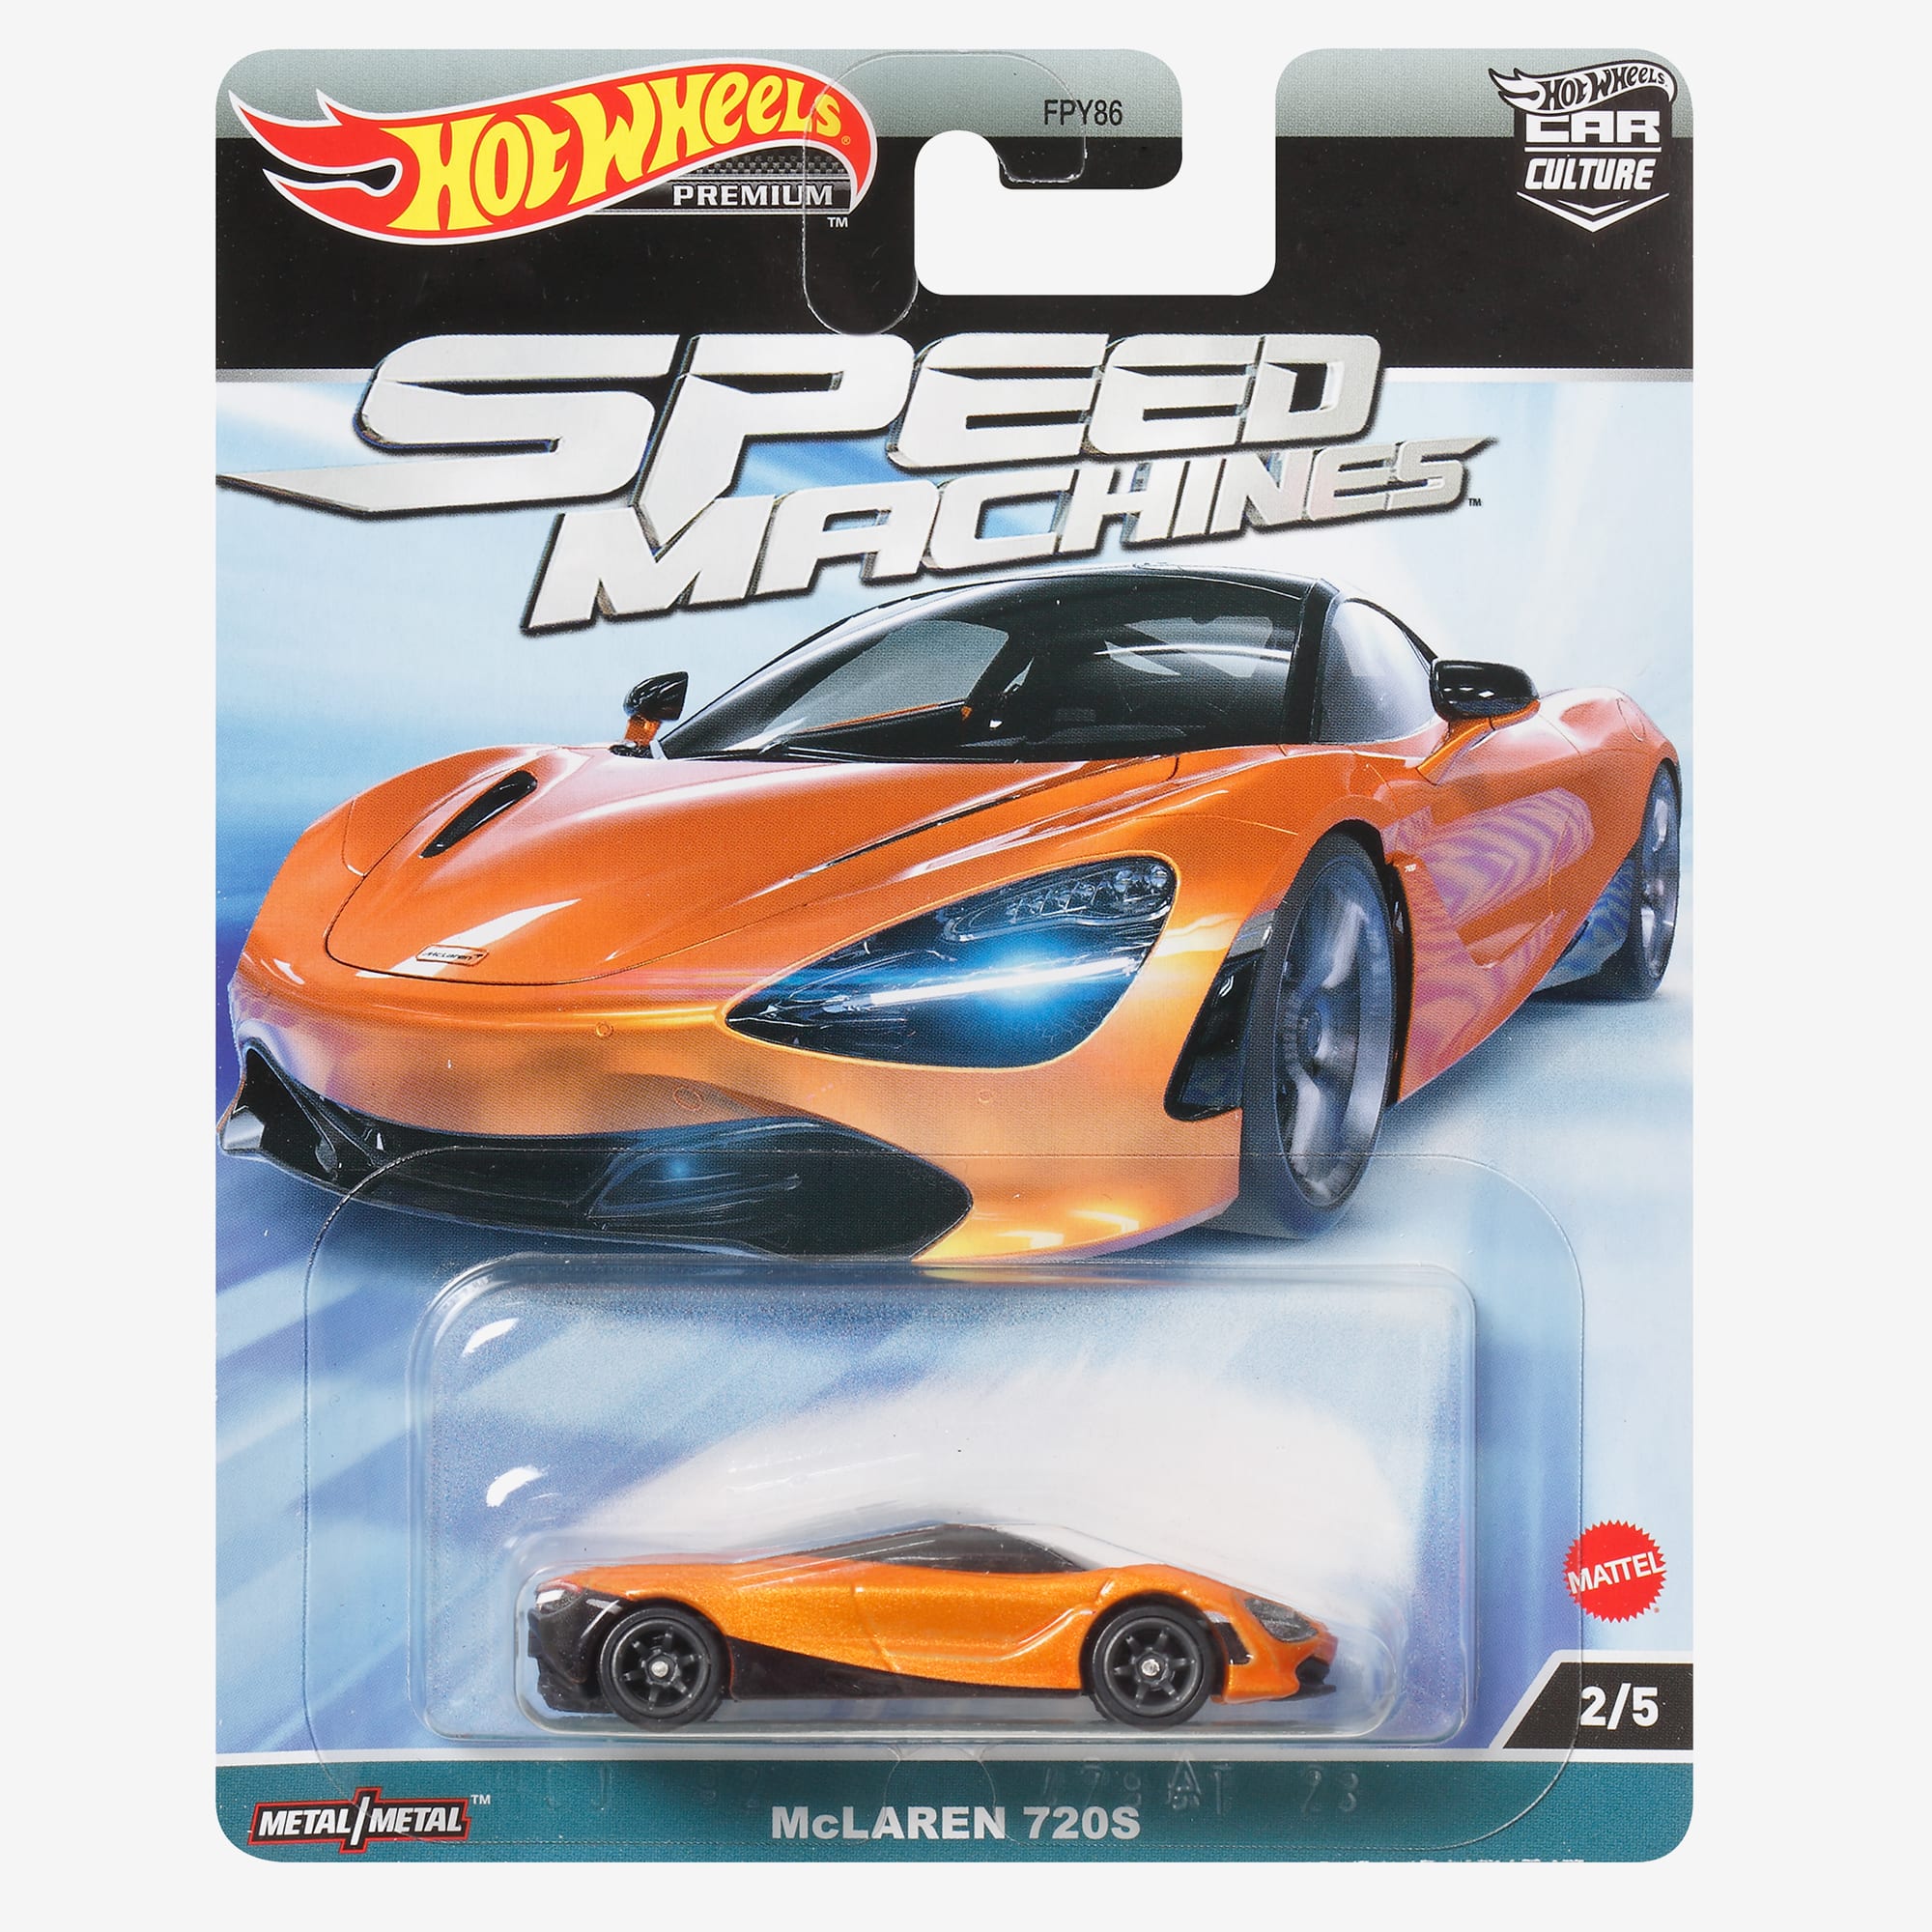 Inside the heartwarming world of Hot Wheels collecting 